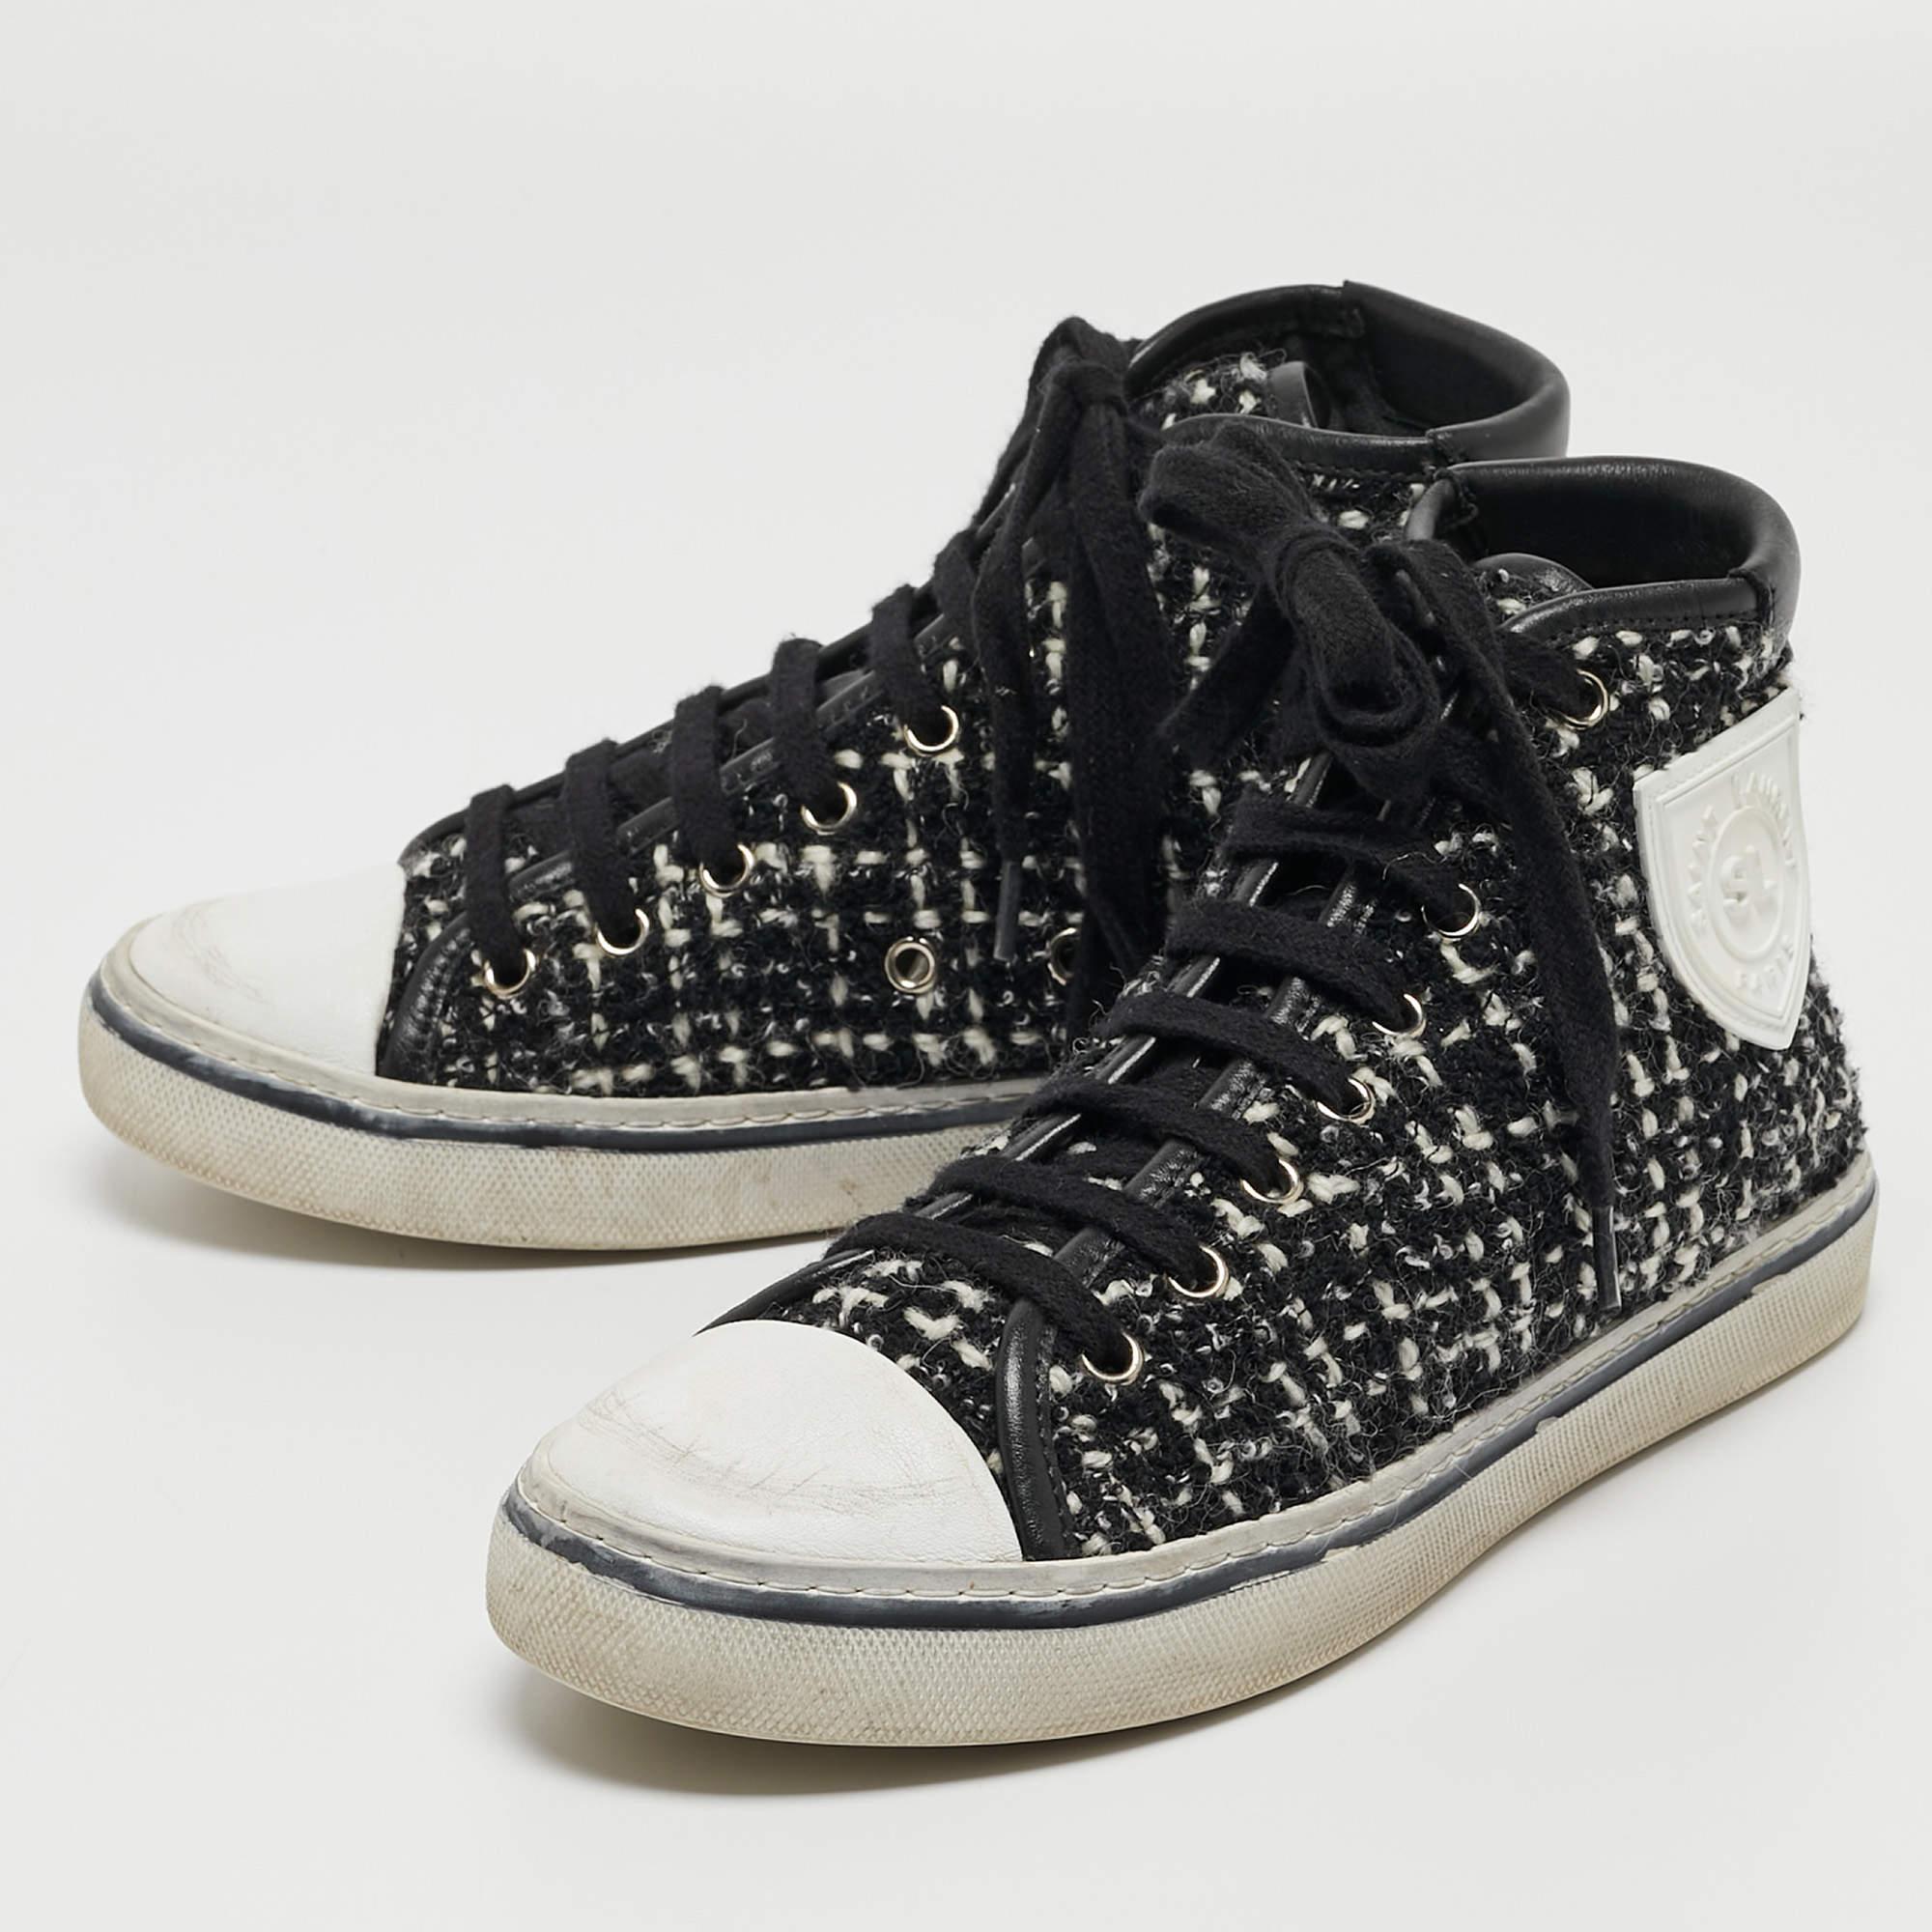 Give your outfit a chic update with this pair of designer sneakers. The creation is sewn perfectly to help you make a statement in them for a long time.

